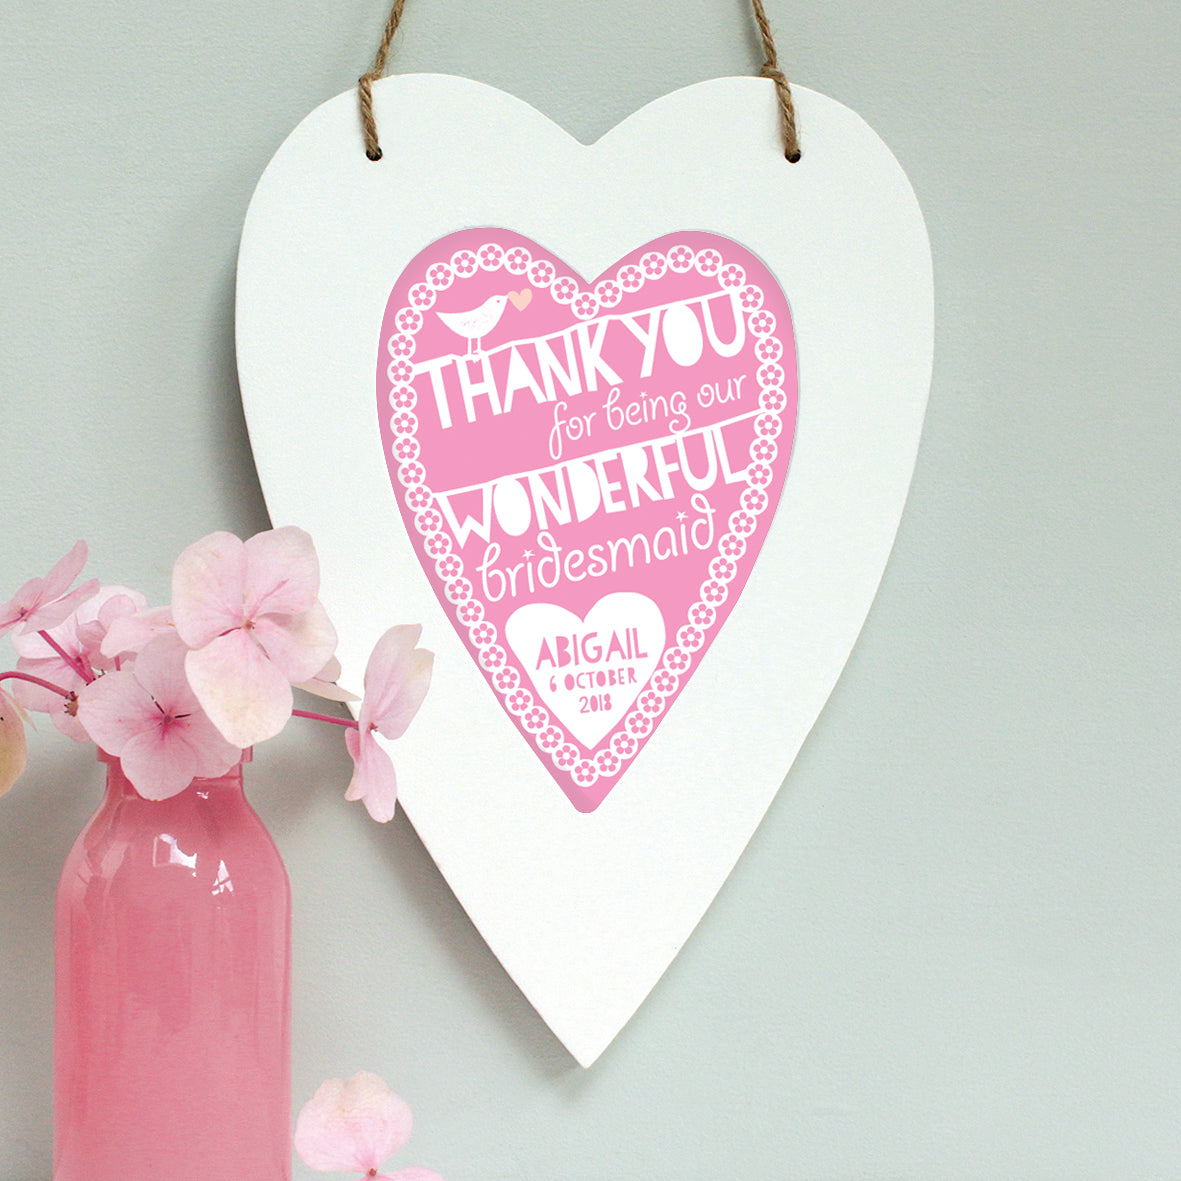 personalised bridesmaid print in pink, white heart frame